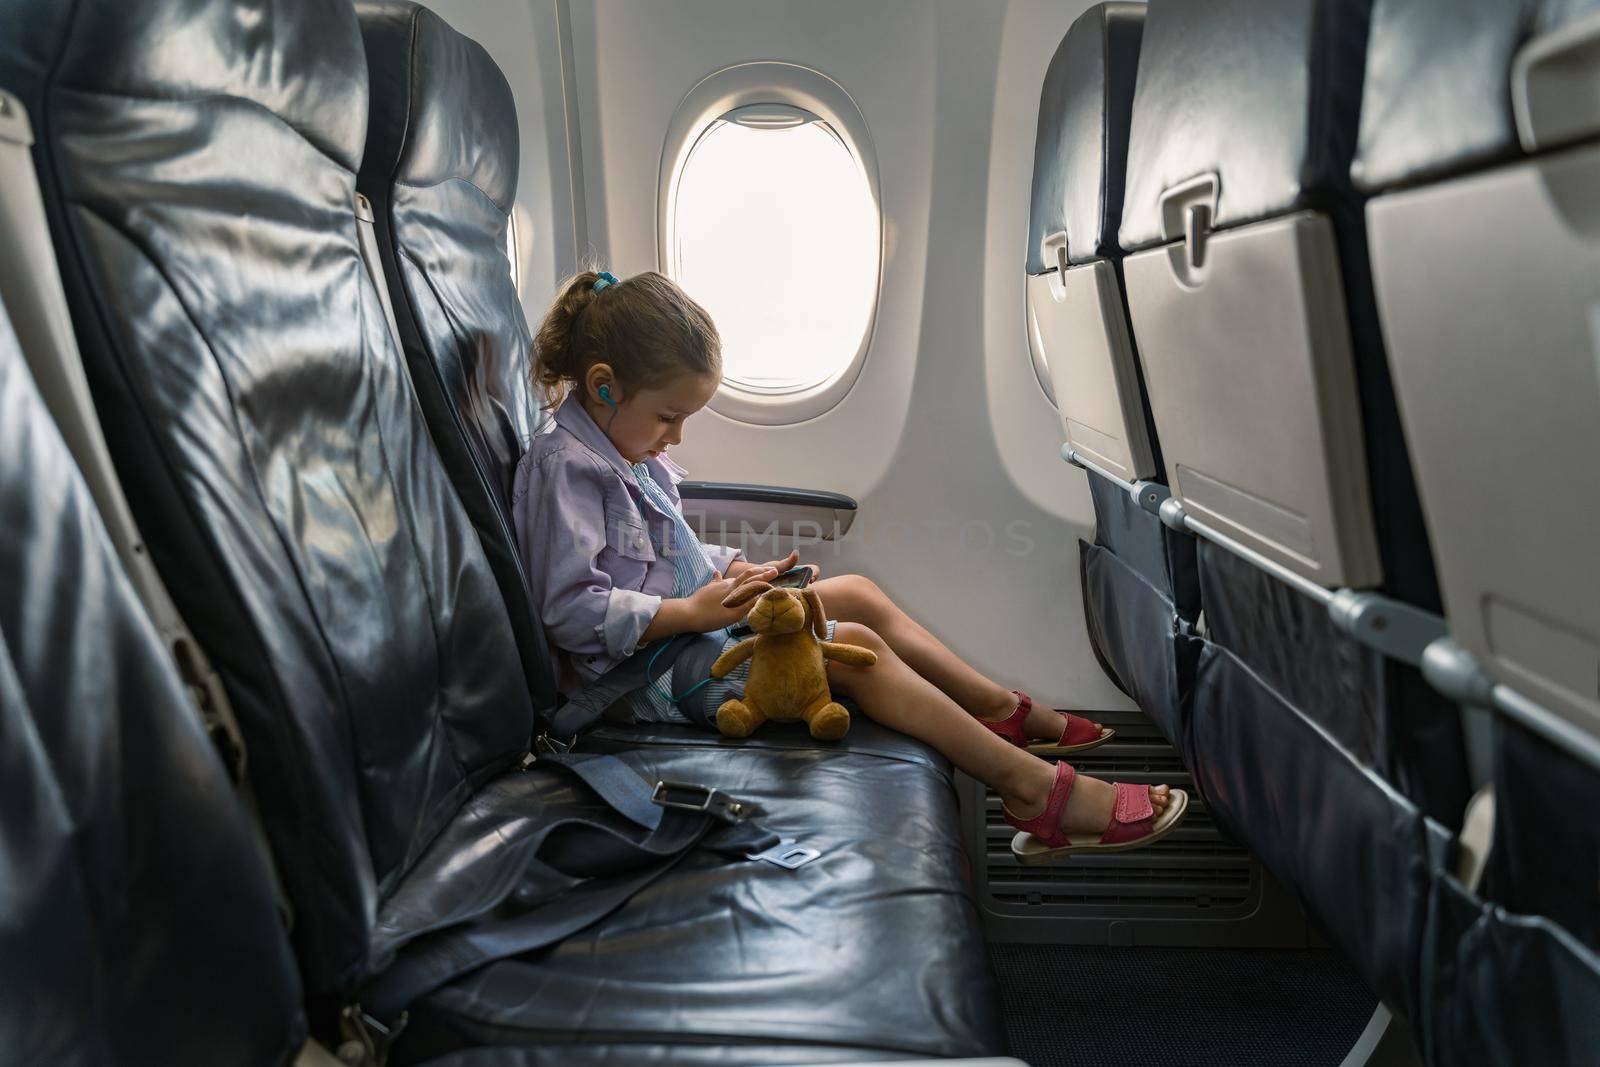 Little girl sitting in a chair and enjoying her phone during trip by airplane by Yaroslav_astakhov